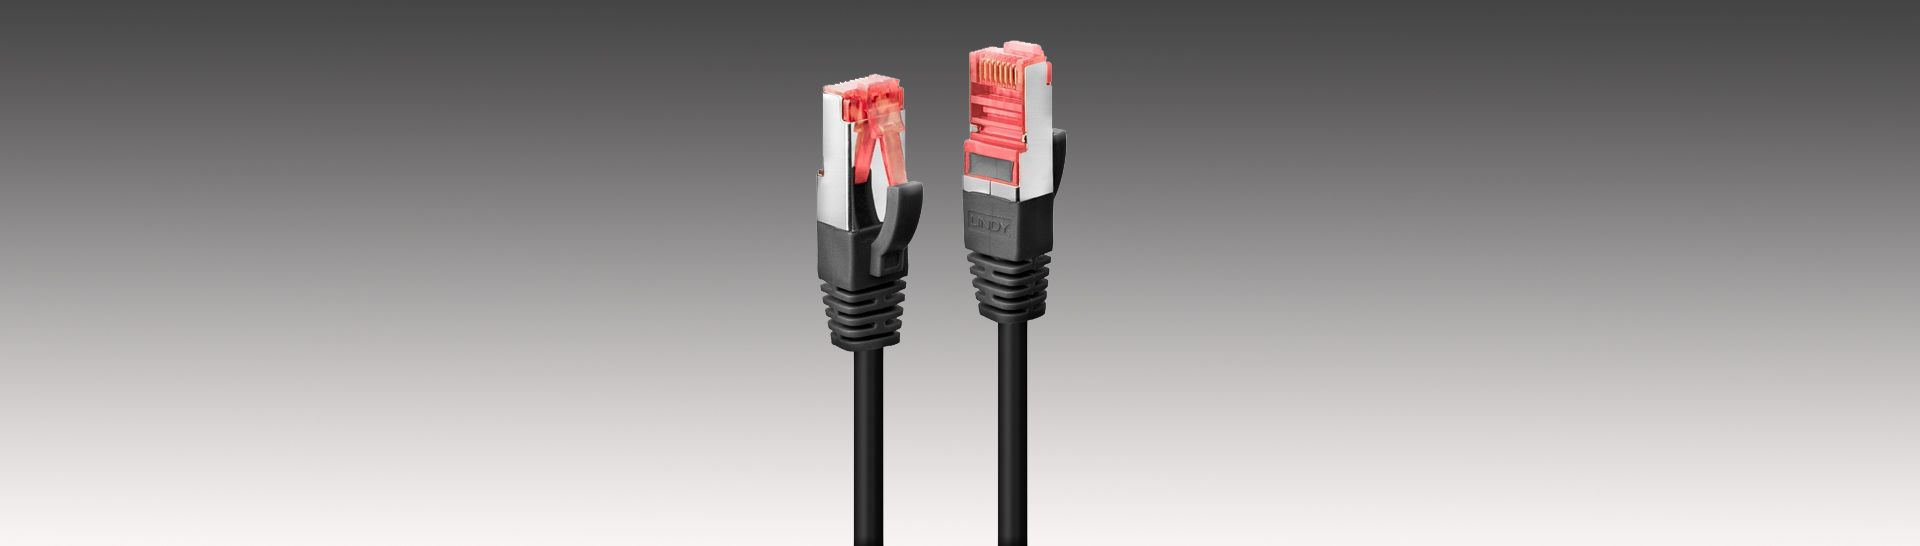 Premium Ethernet cables from Projectorpoint